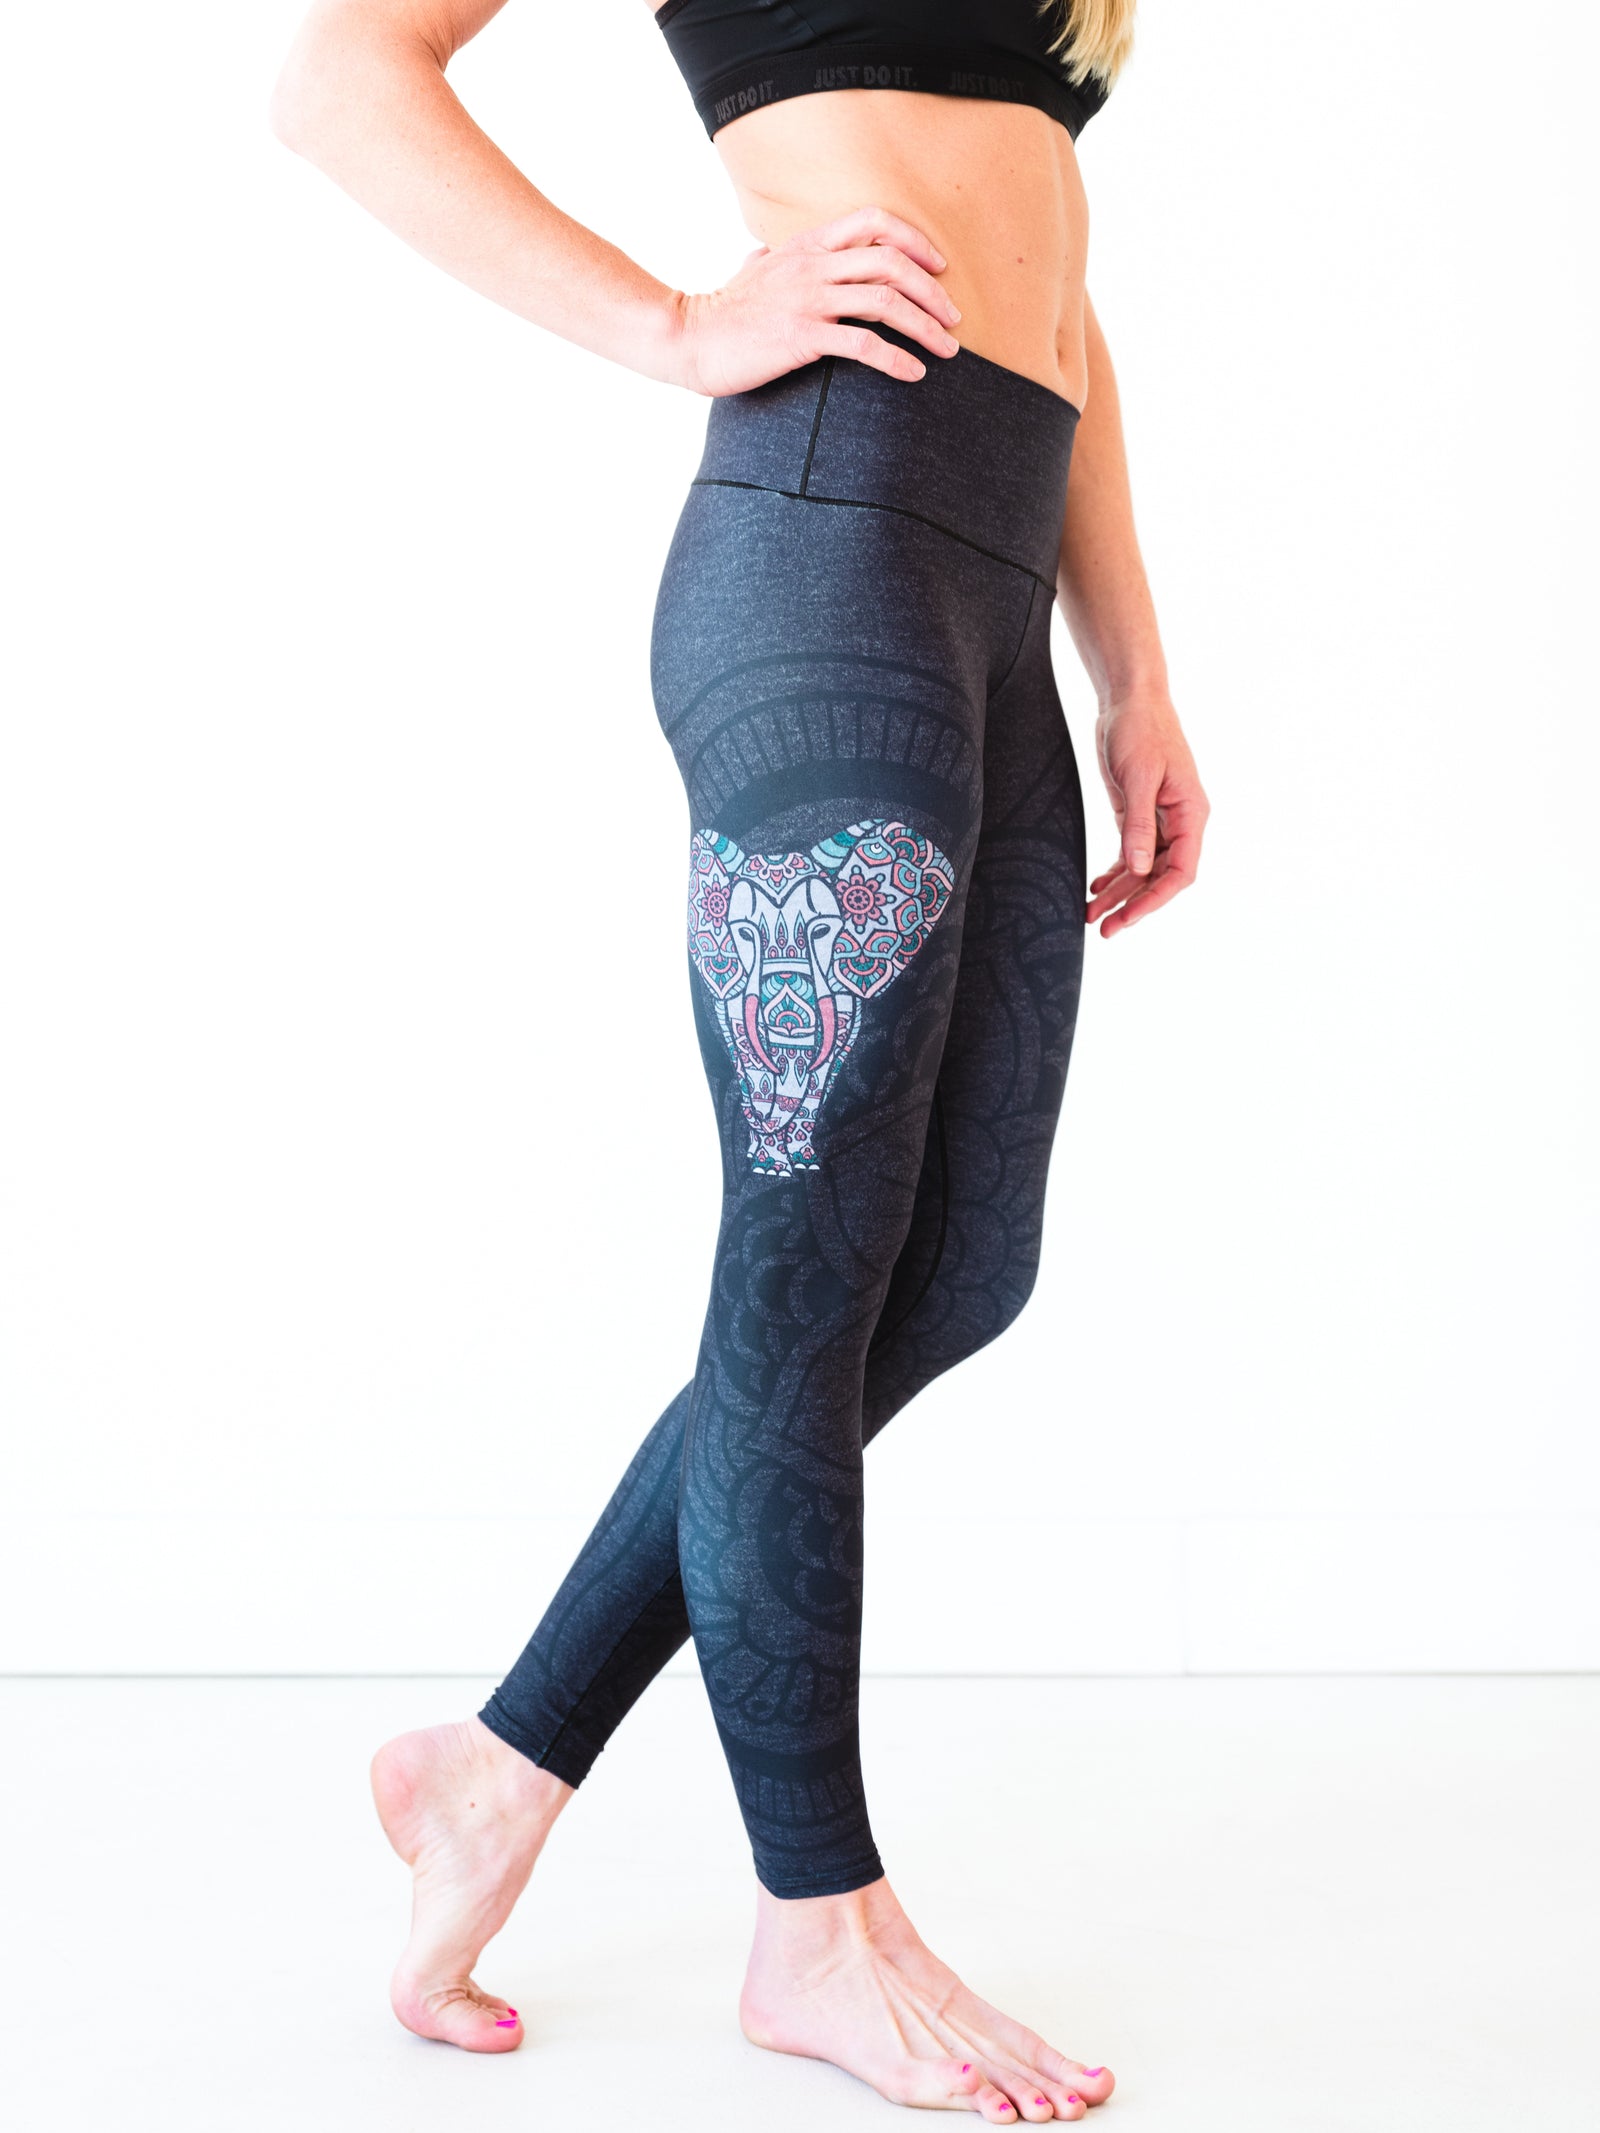 Elephant Print Yoga Pants One Size Fit Most | Buy Now